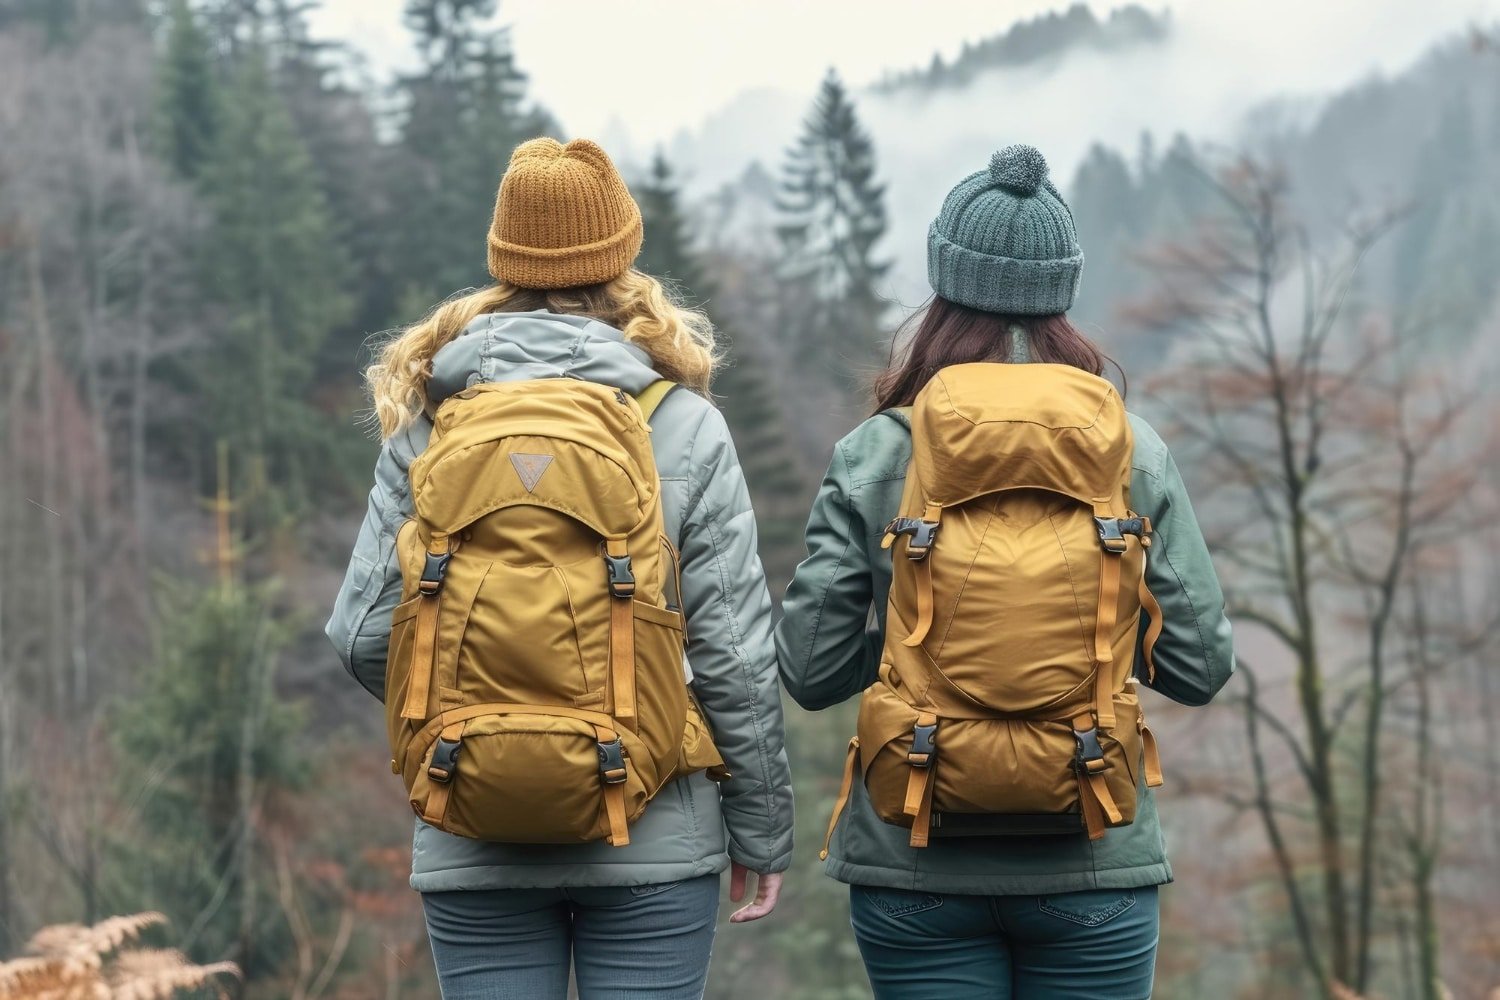 Stylish Backpacks by Adventurist Backpack Co.